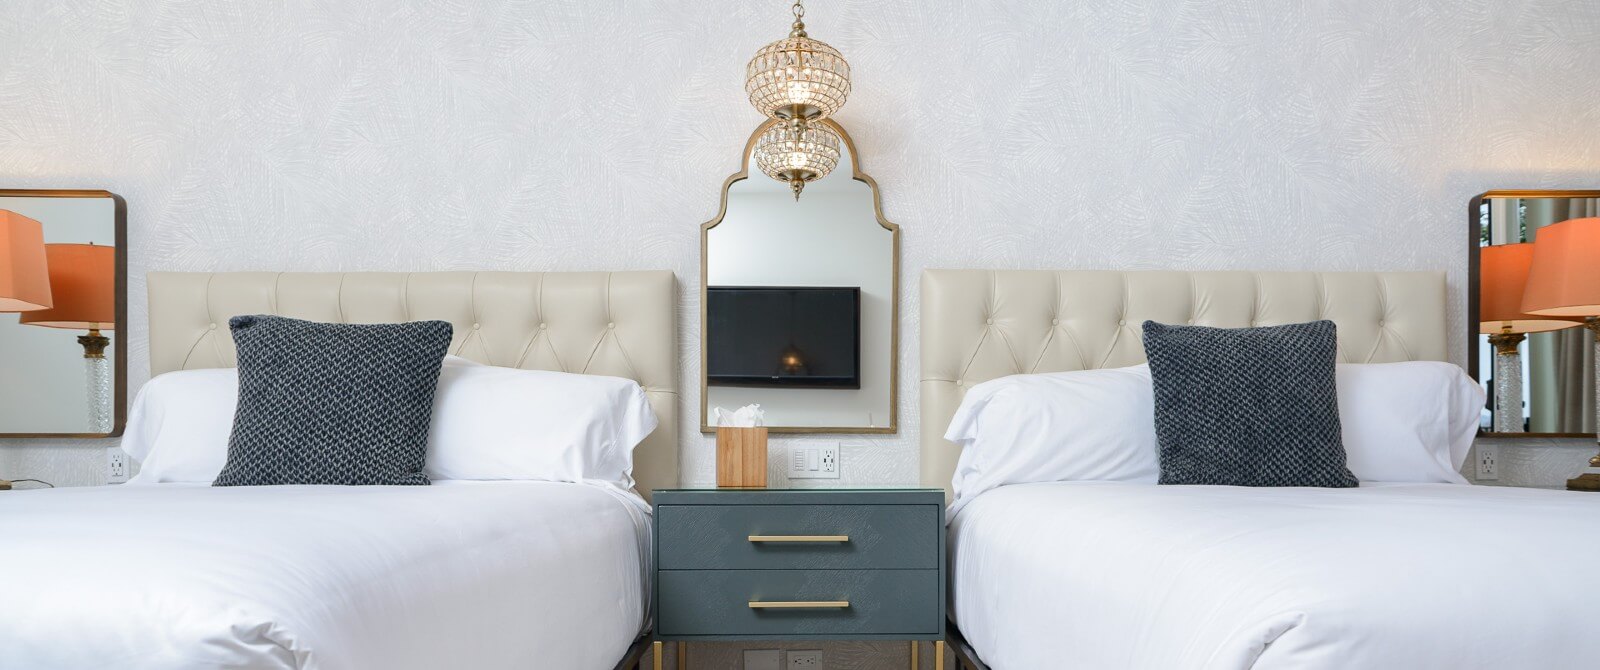 Two queens in white linens with leather tufted headboards with side table and decorative mirror